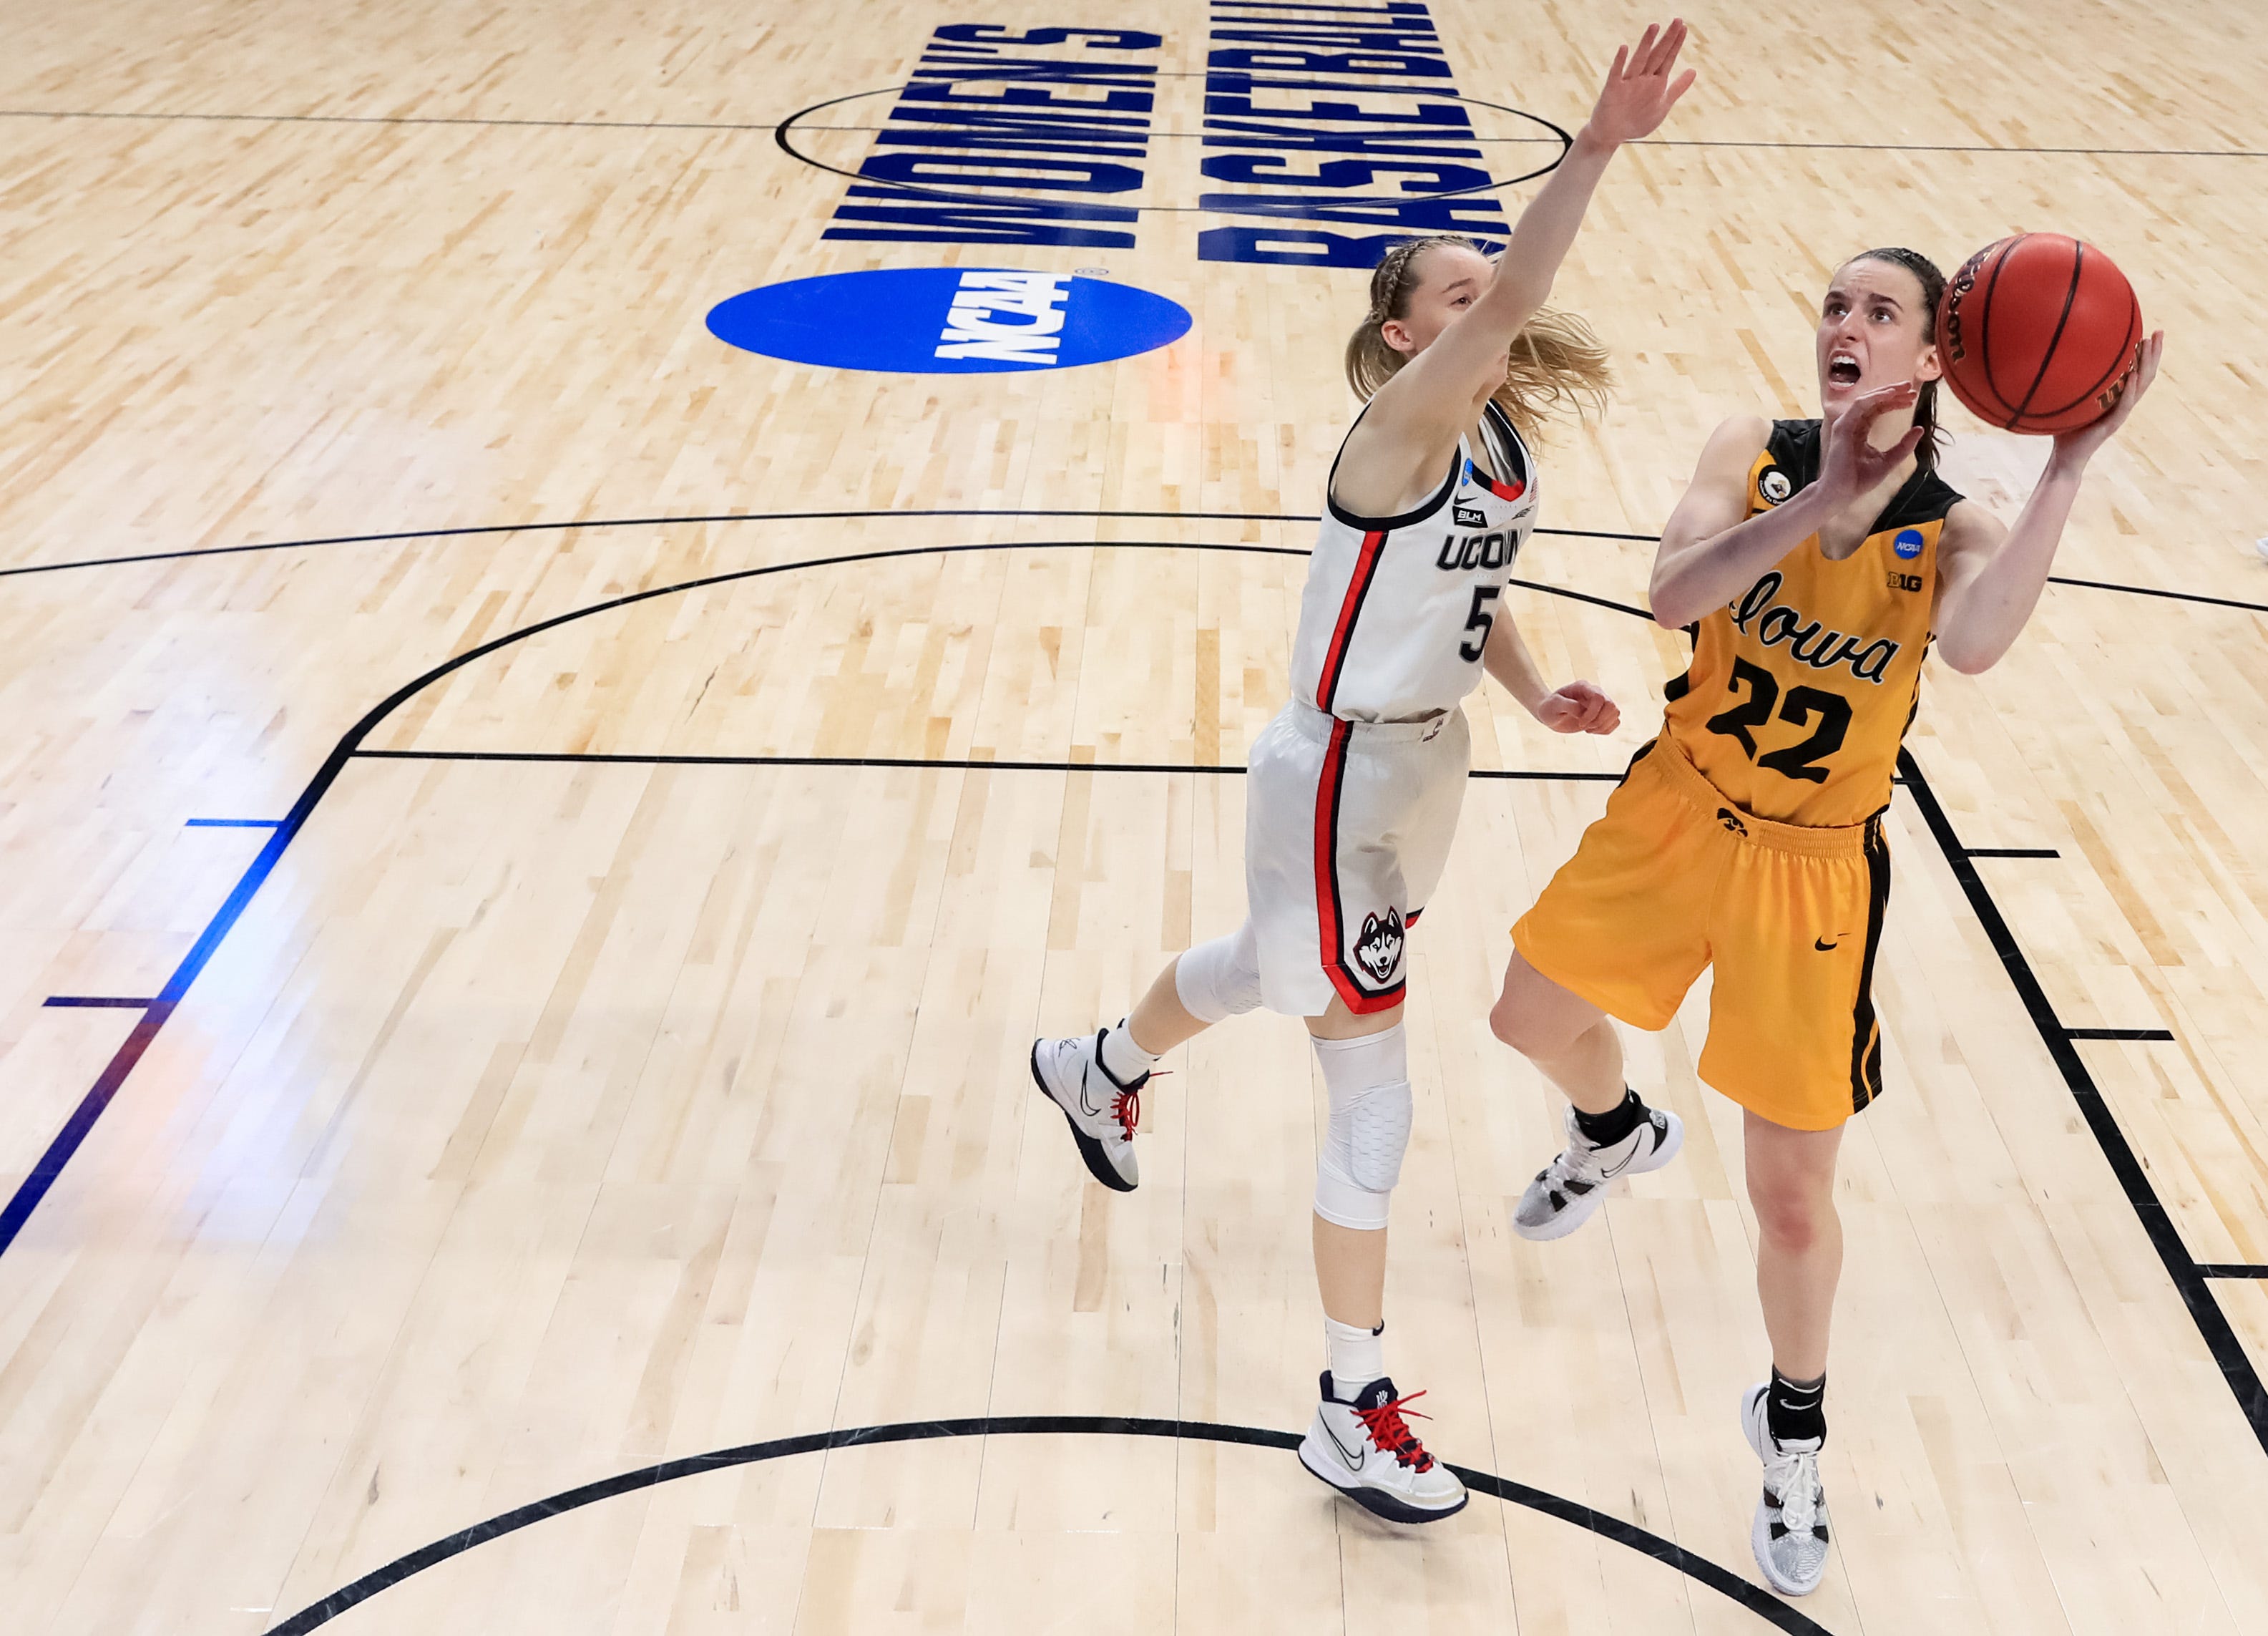 Iowa guard Caitlin Clark (22) drives to the basket against UConn's Paige Bueckers (5) during the second half in the Sweet 16 round of the NCAA Women's Basketball Tournament at the Alamodome on March 27, 2021 in San Antonio, Texas.